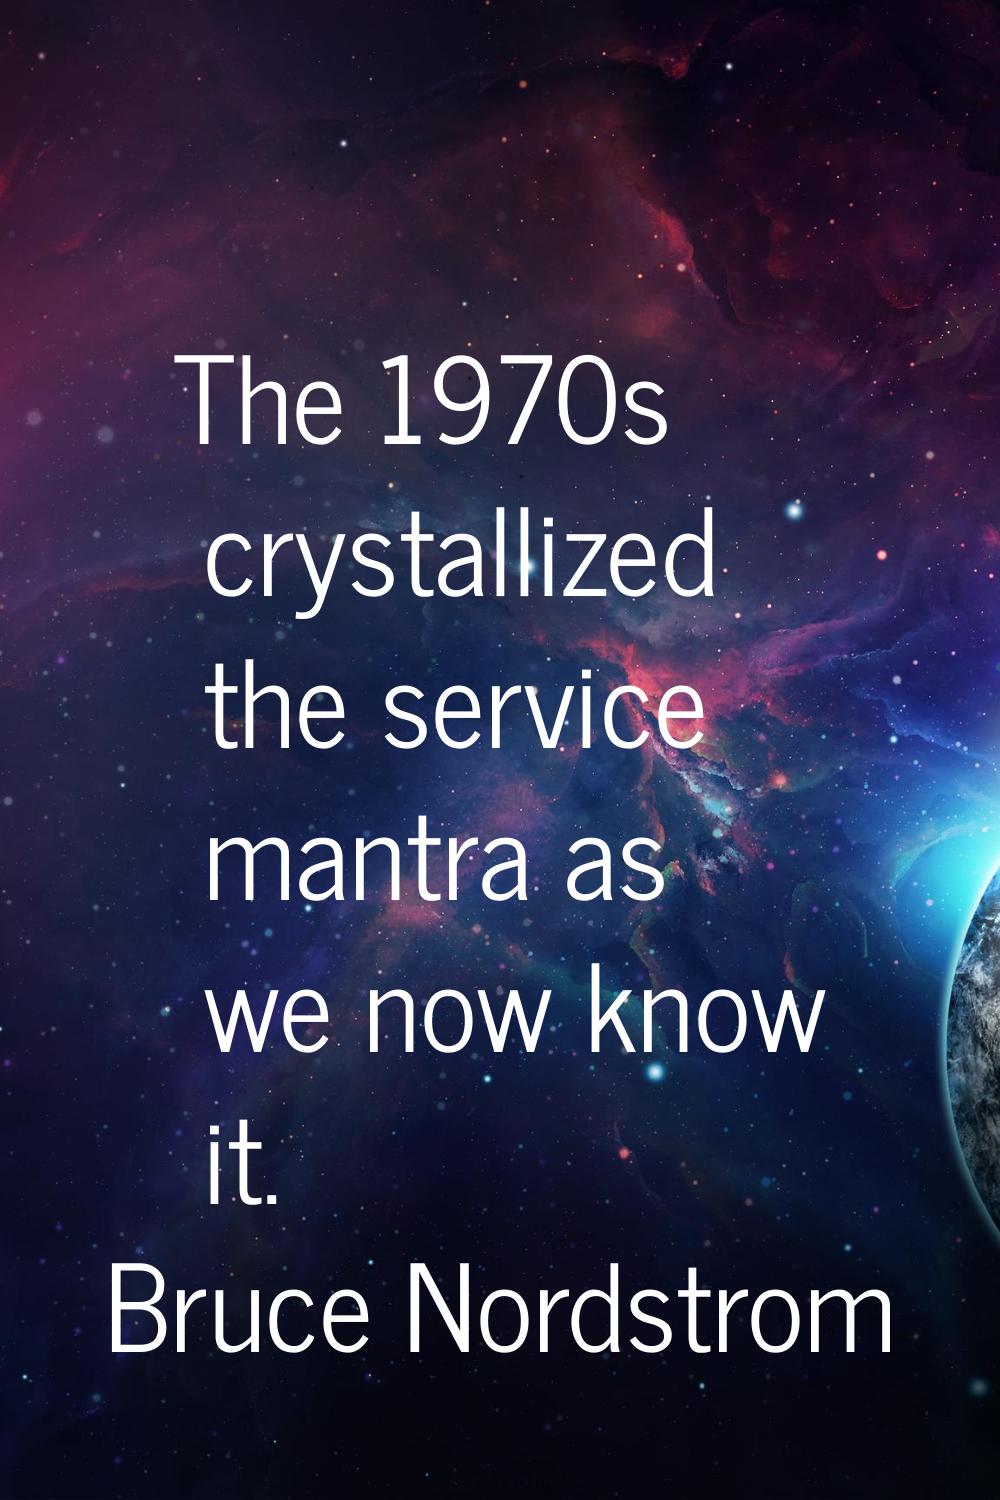 The 1970s crystallized the service mantra as we now know it.